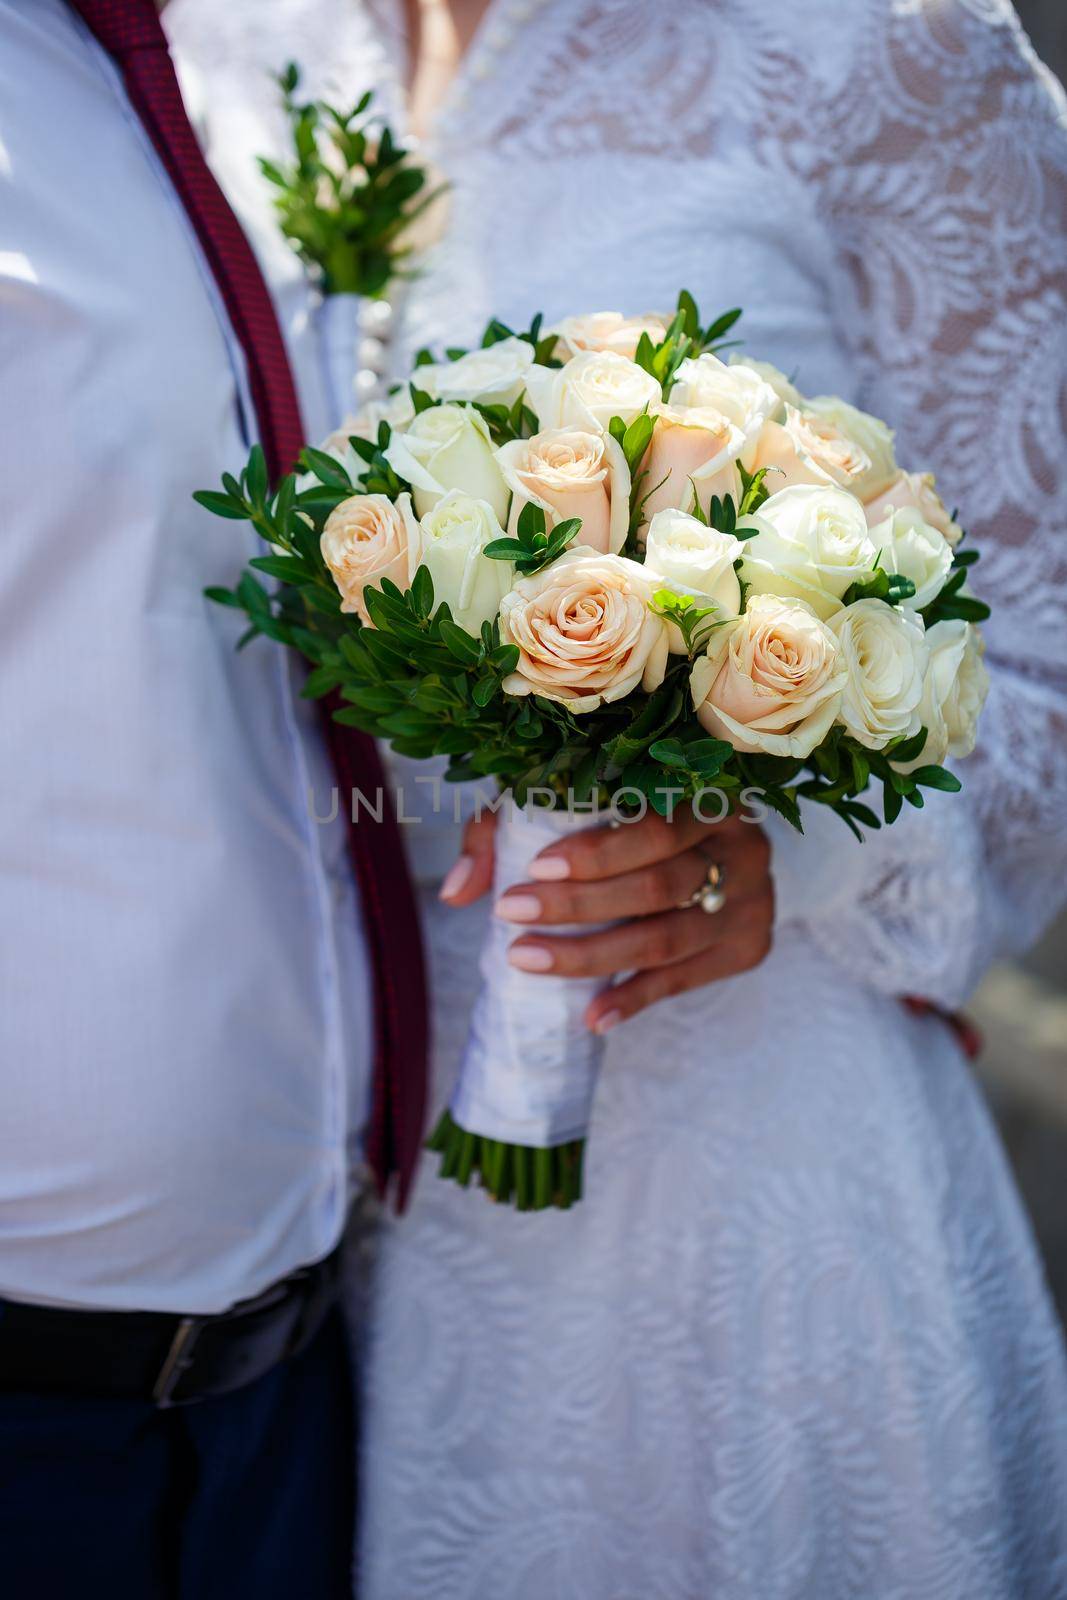 A bouquet of fresh flowers in the hands of the bride